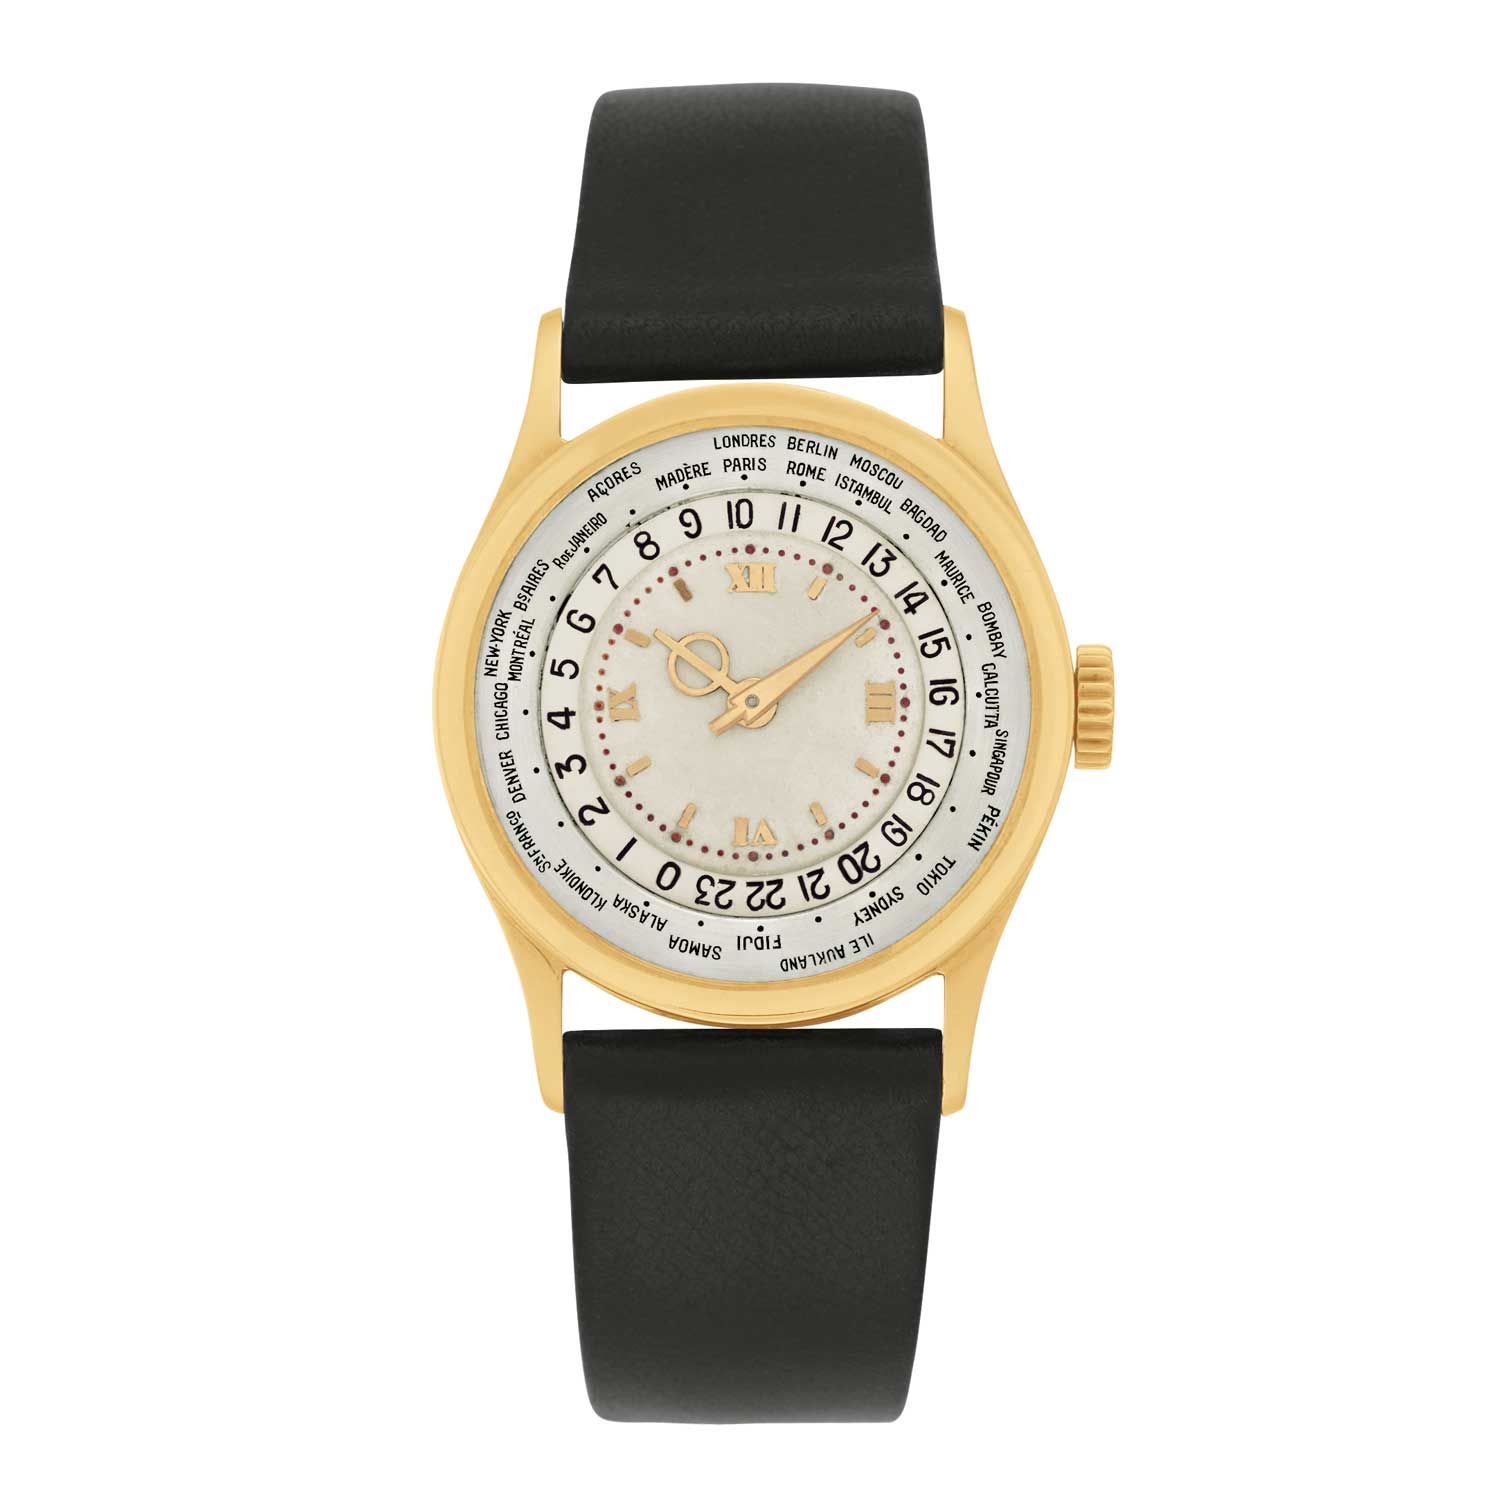 Patek Philippe ref. 96 HU has the names of 28 cities on a ring around the dial.